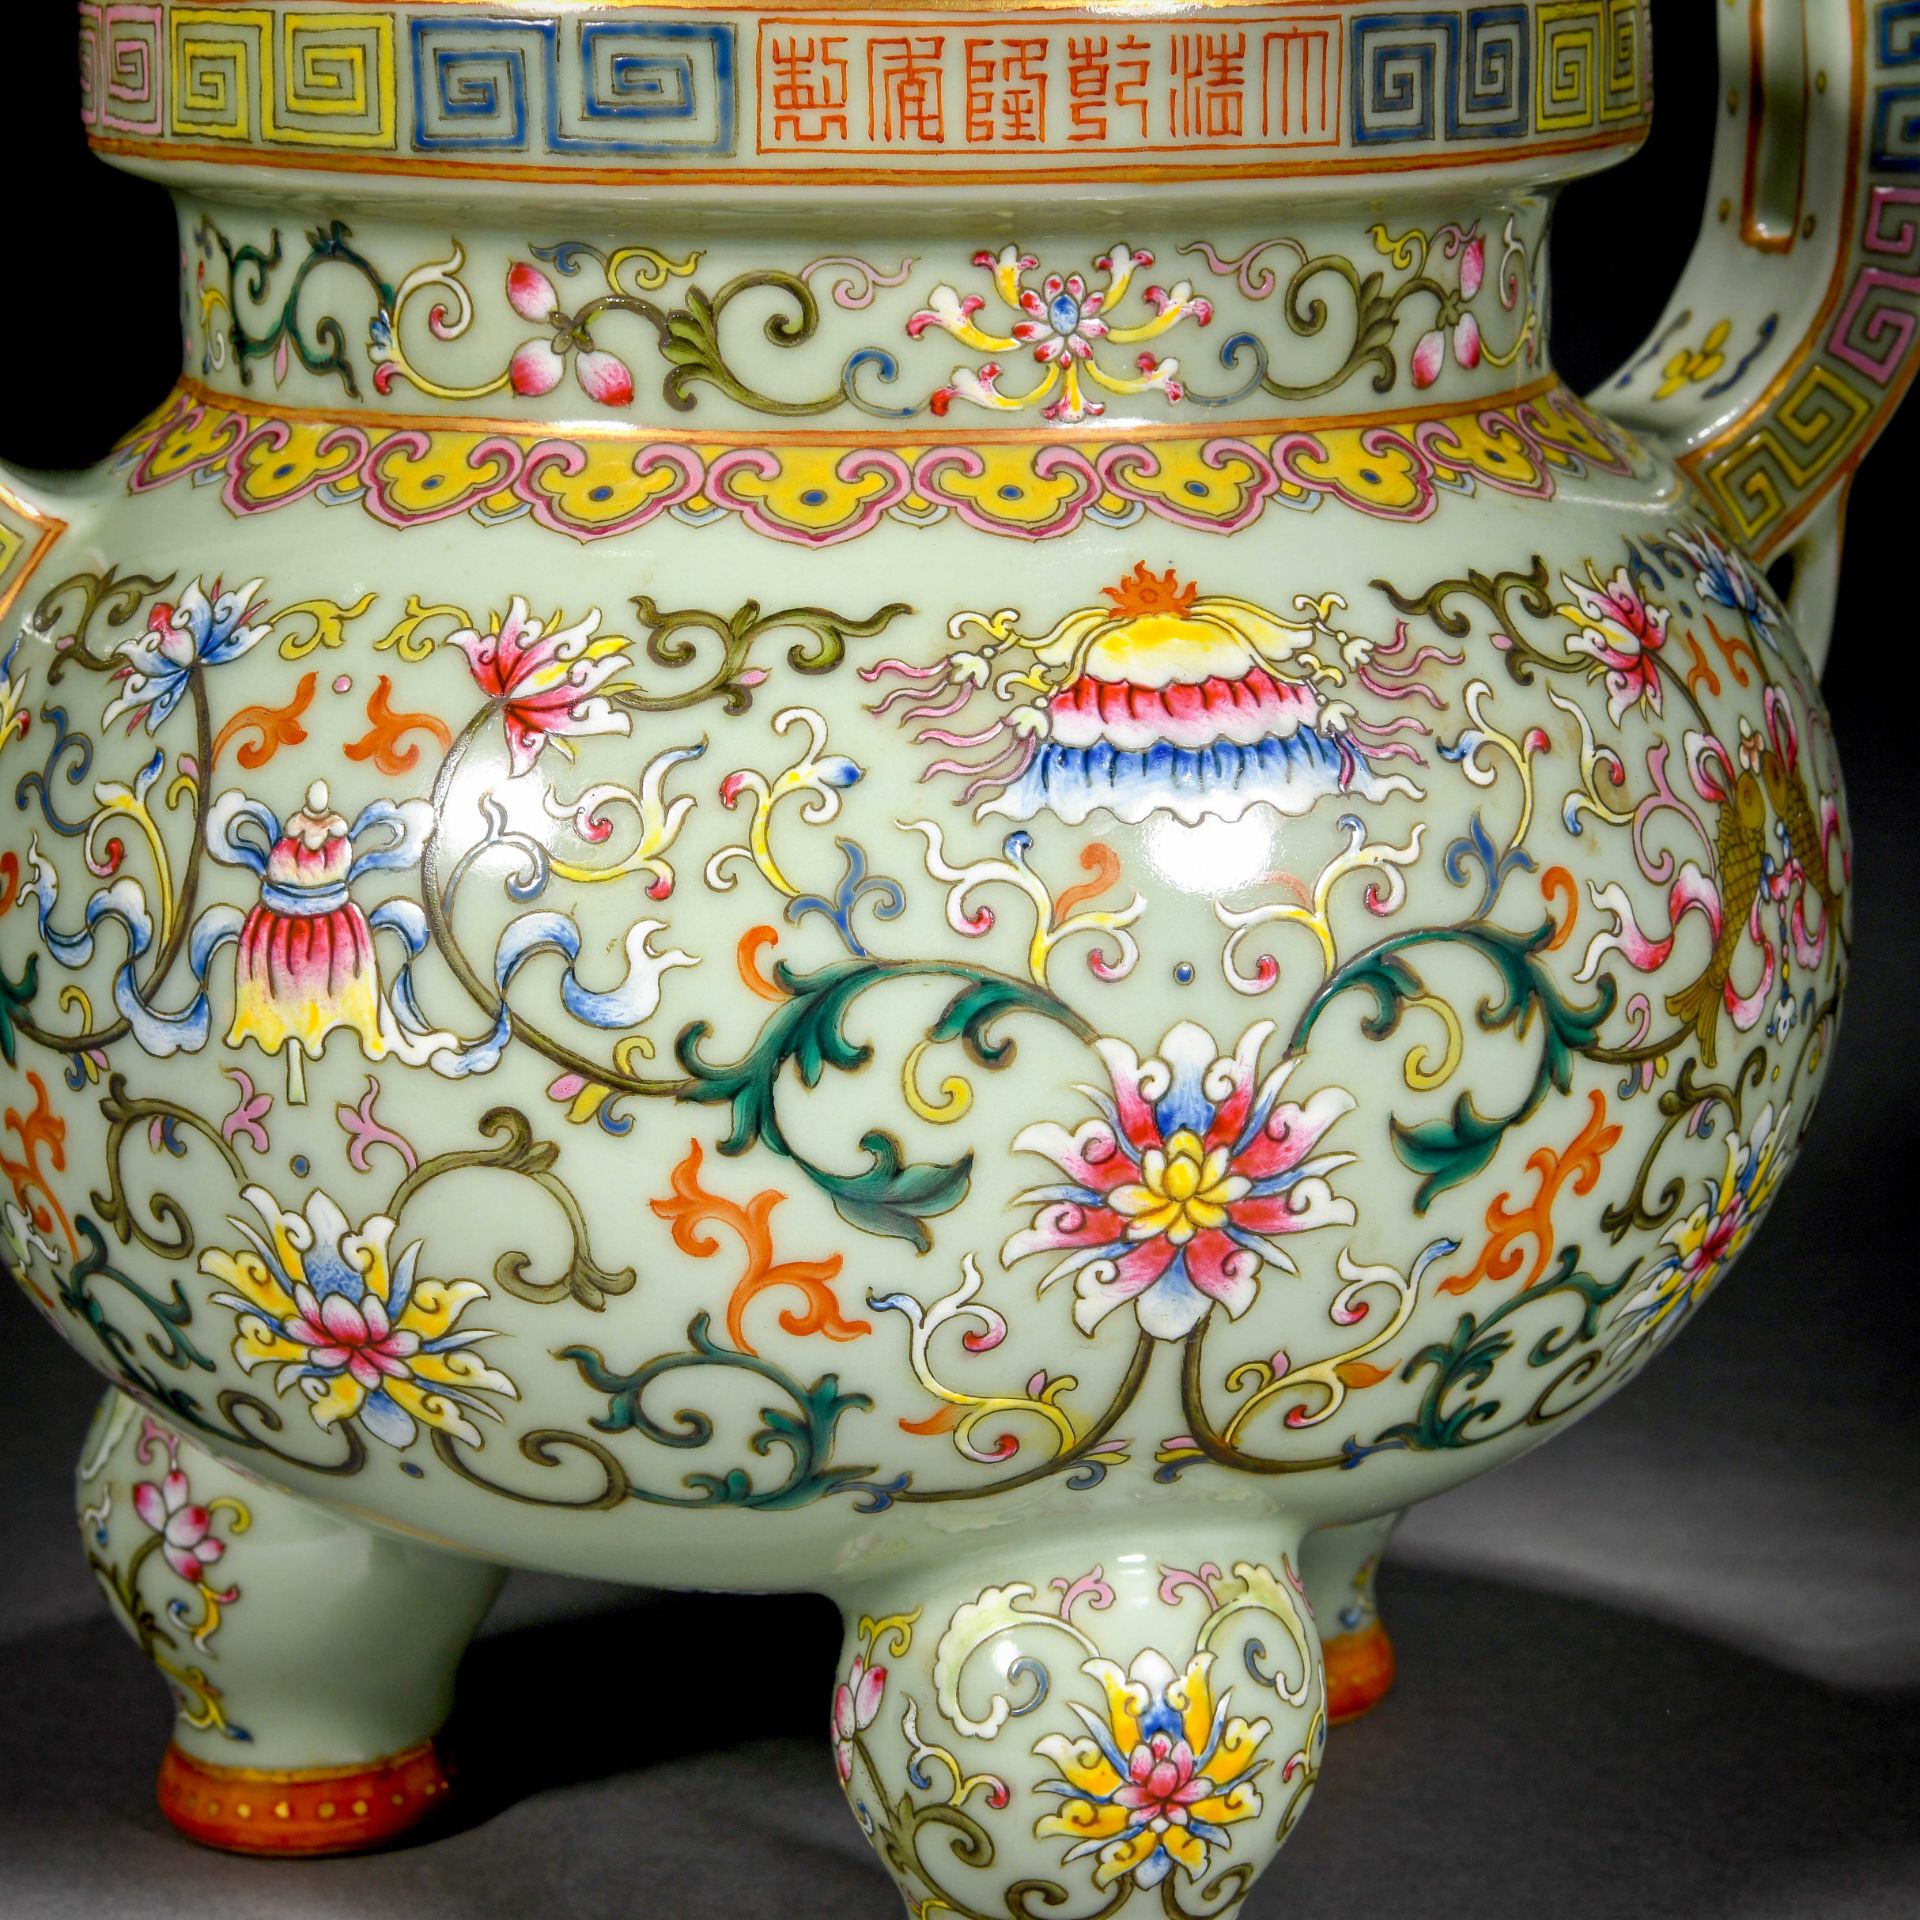 A Chinese Famille Rose Eight Treasured Incense Burner - Image 6 of 12